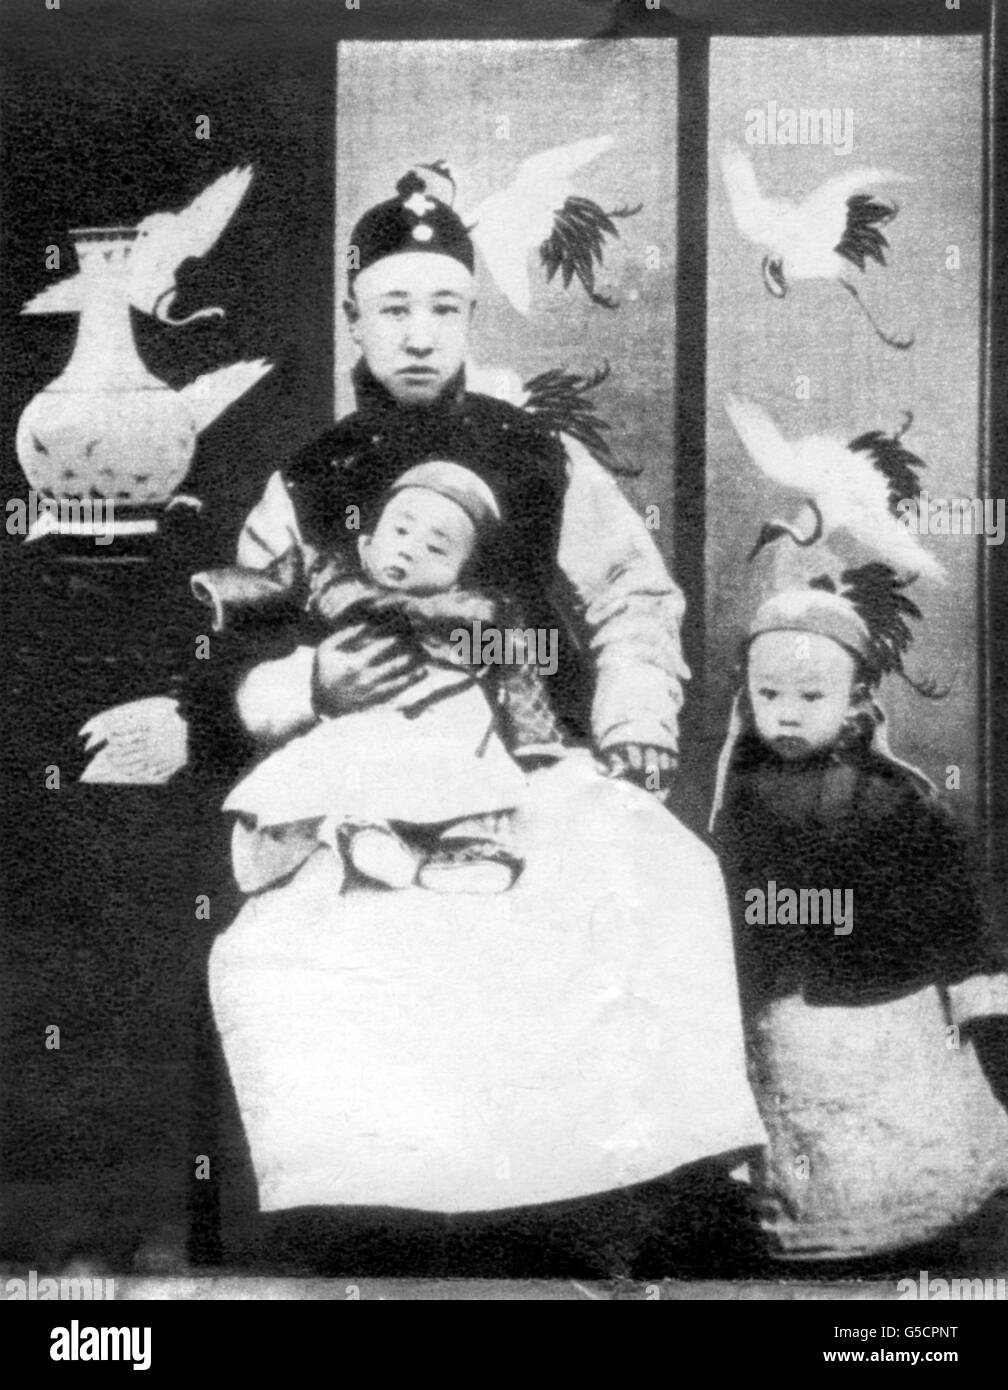 The three year old Aisin-Gioro Puyi, the Xuantong Emperor of China, who abdicated in 1912 and still lives in Peking under the name of Henry Puyi. He is seen here on the knee of his father, the Regent, Prince Zaifeng Chun. His younger brother Prince Pujie stands next to them. Stock Photo